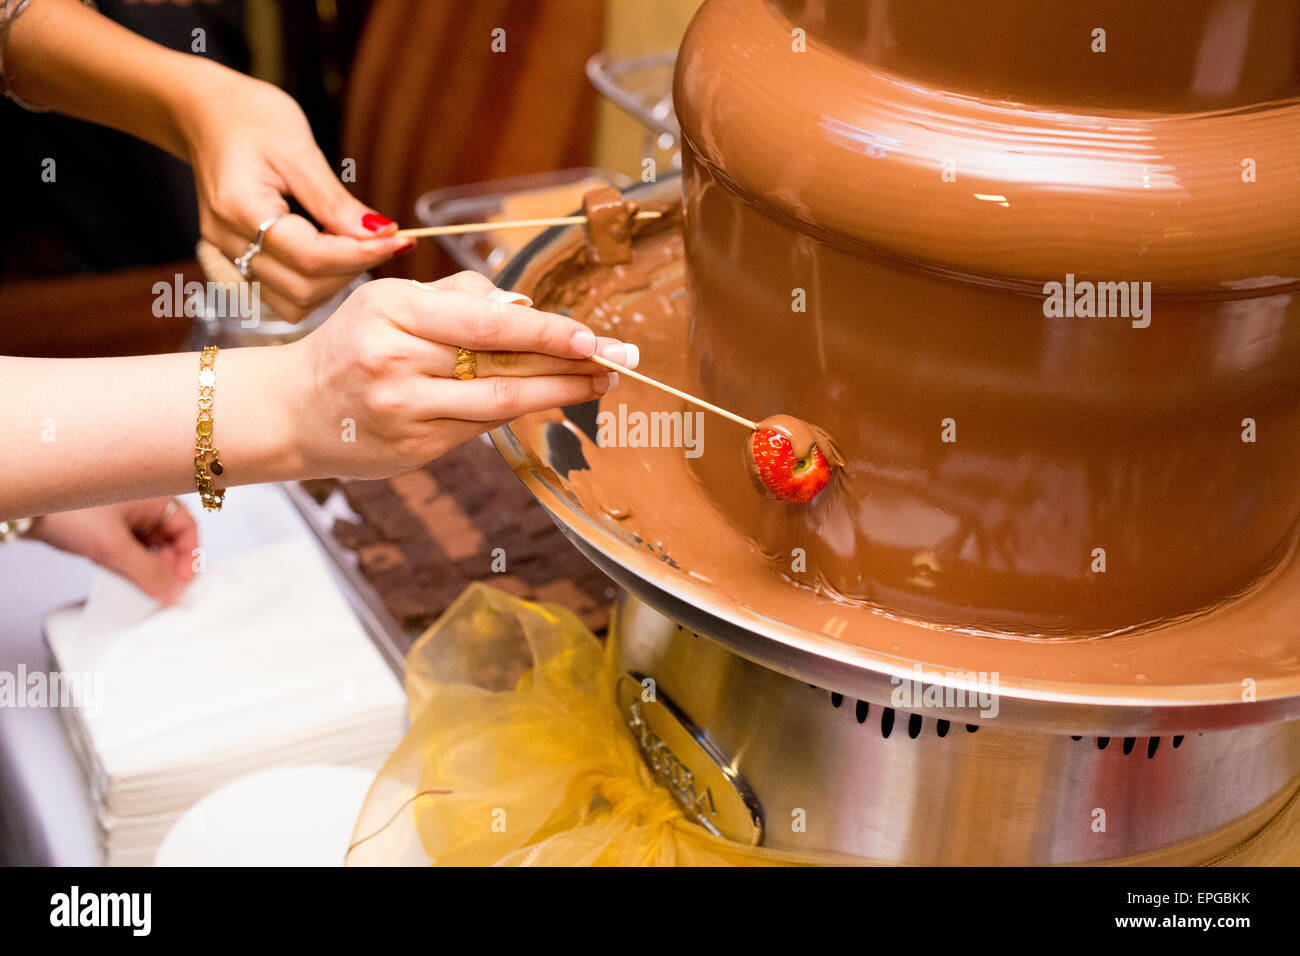 hands dipping snacks into a chocolate fountain Stock Photo